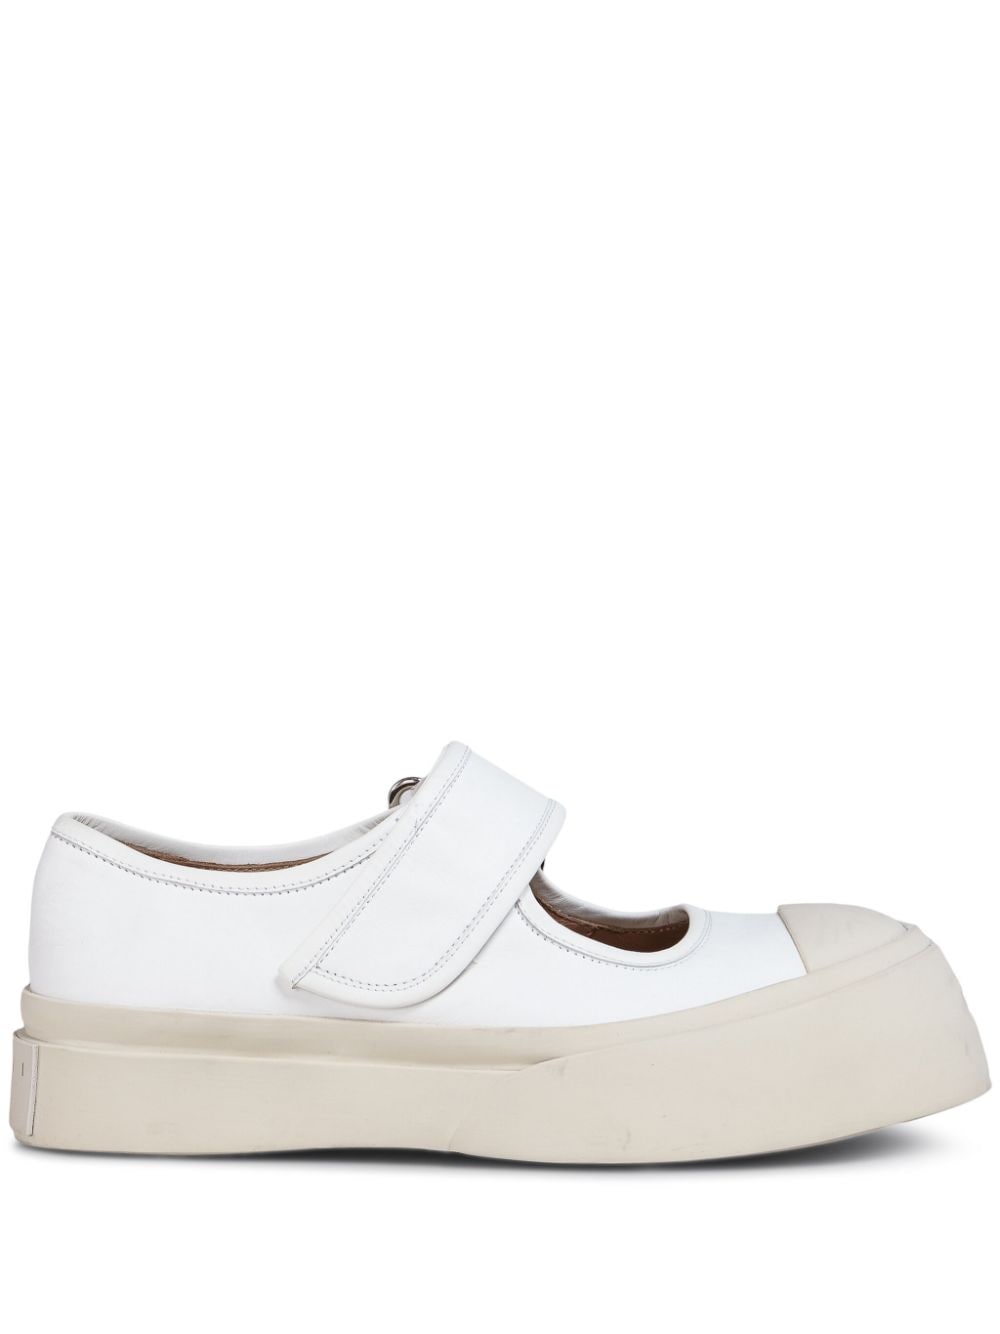 Image 1 of Marni Sneakers Mary Jane